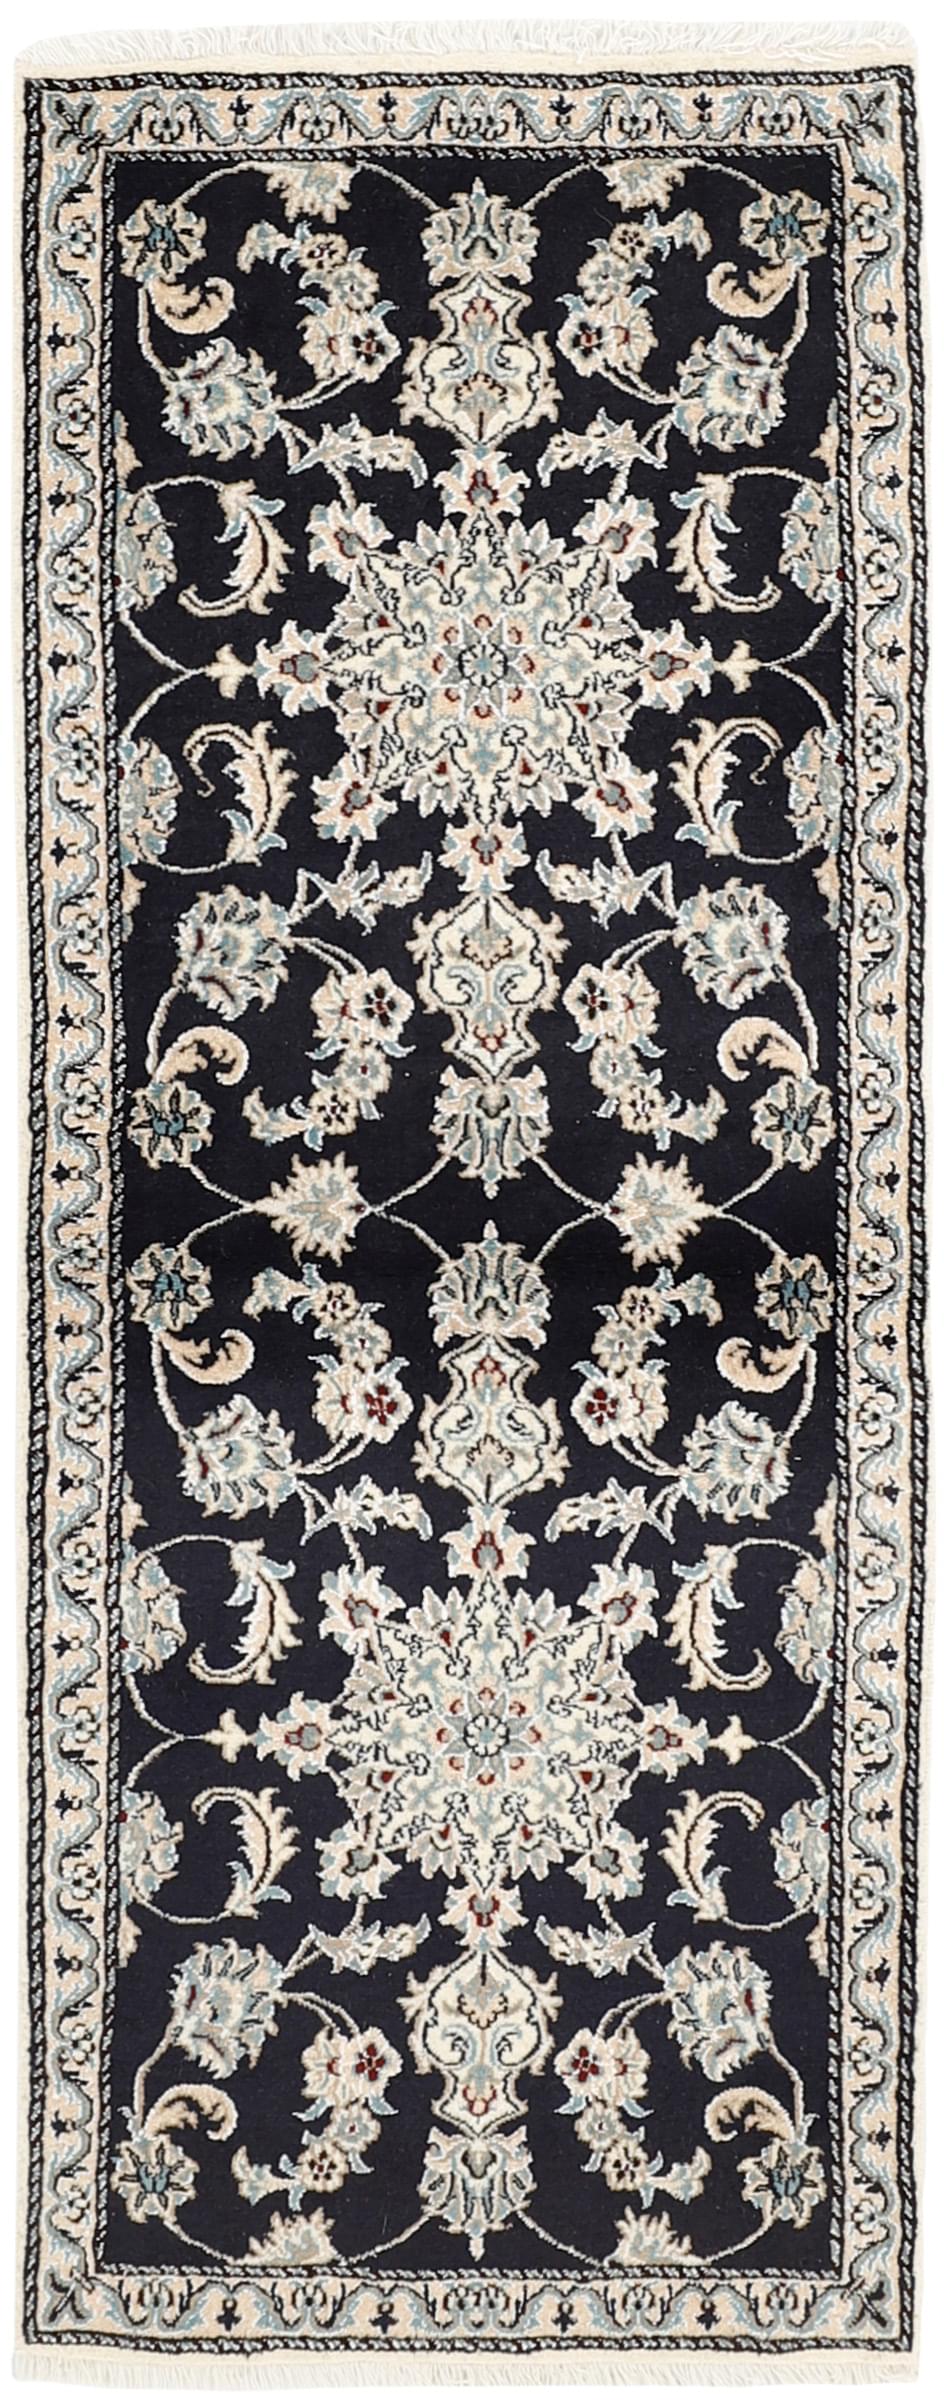 authentic persian runner with navy and black floral design